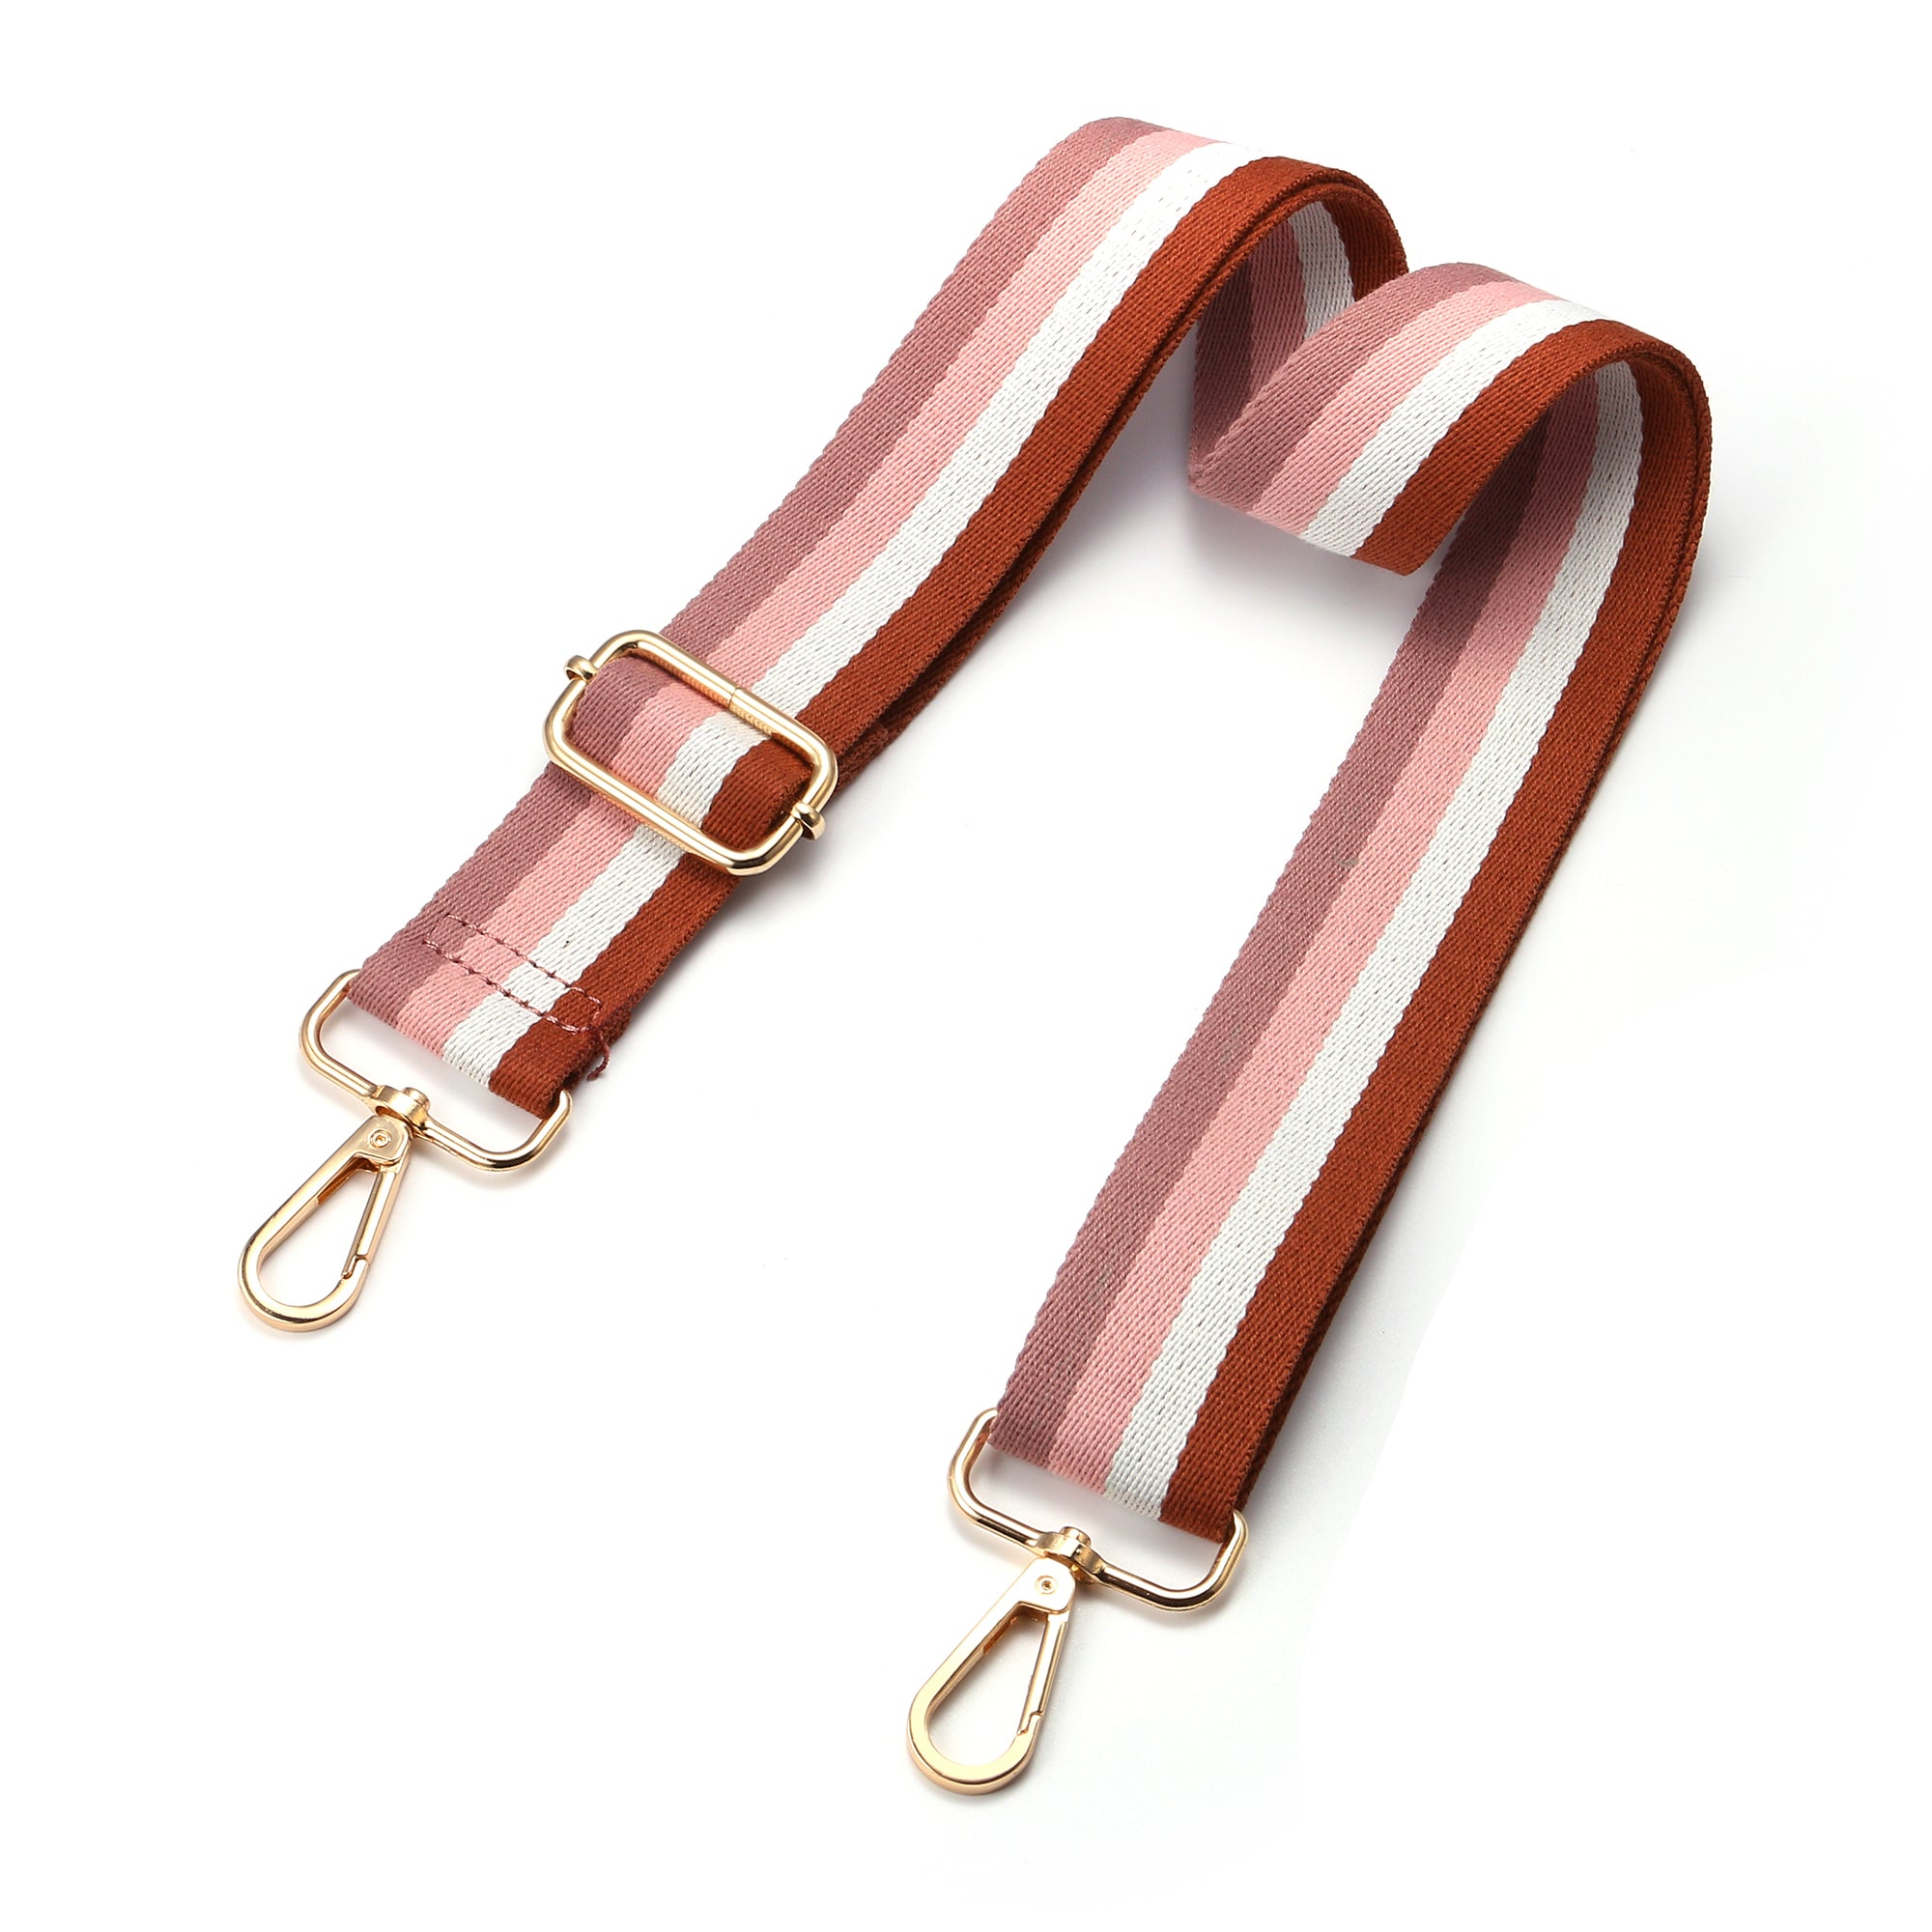  rulebey Leather Straps Replacement for Handbags,Purse